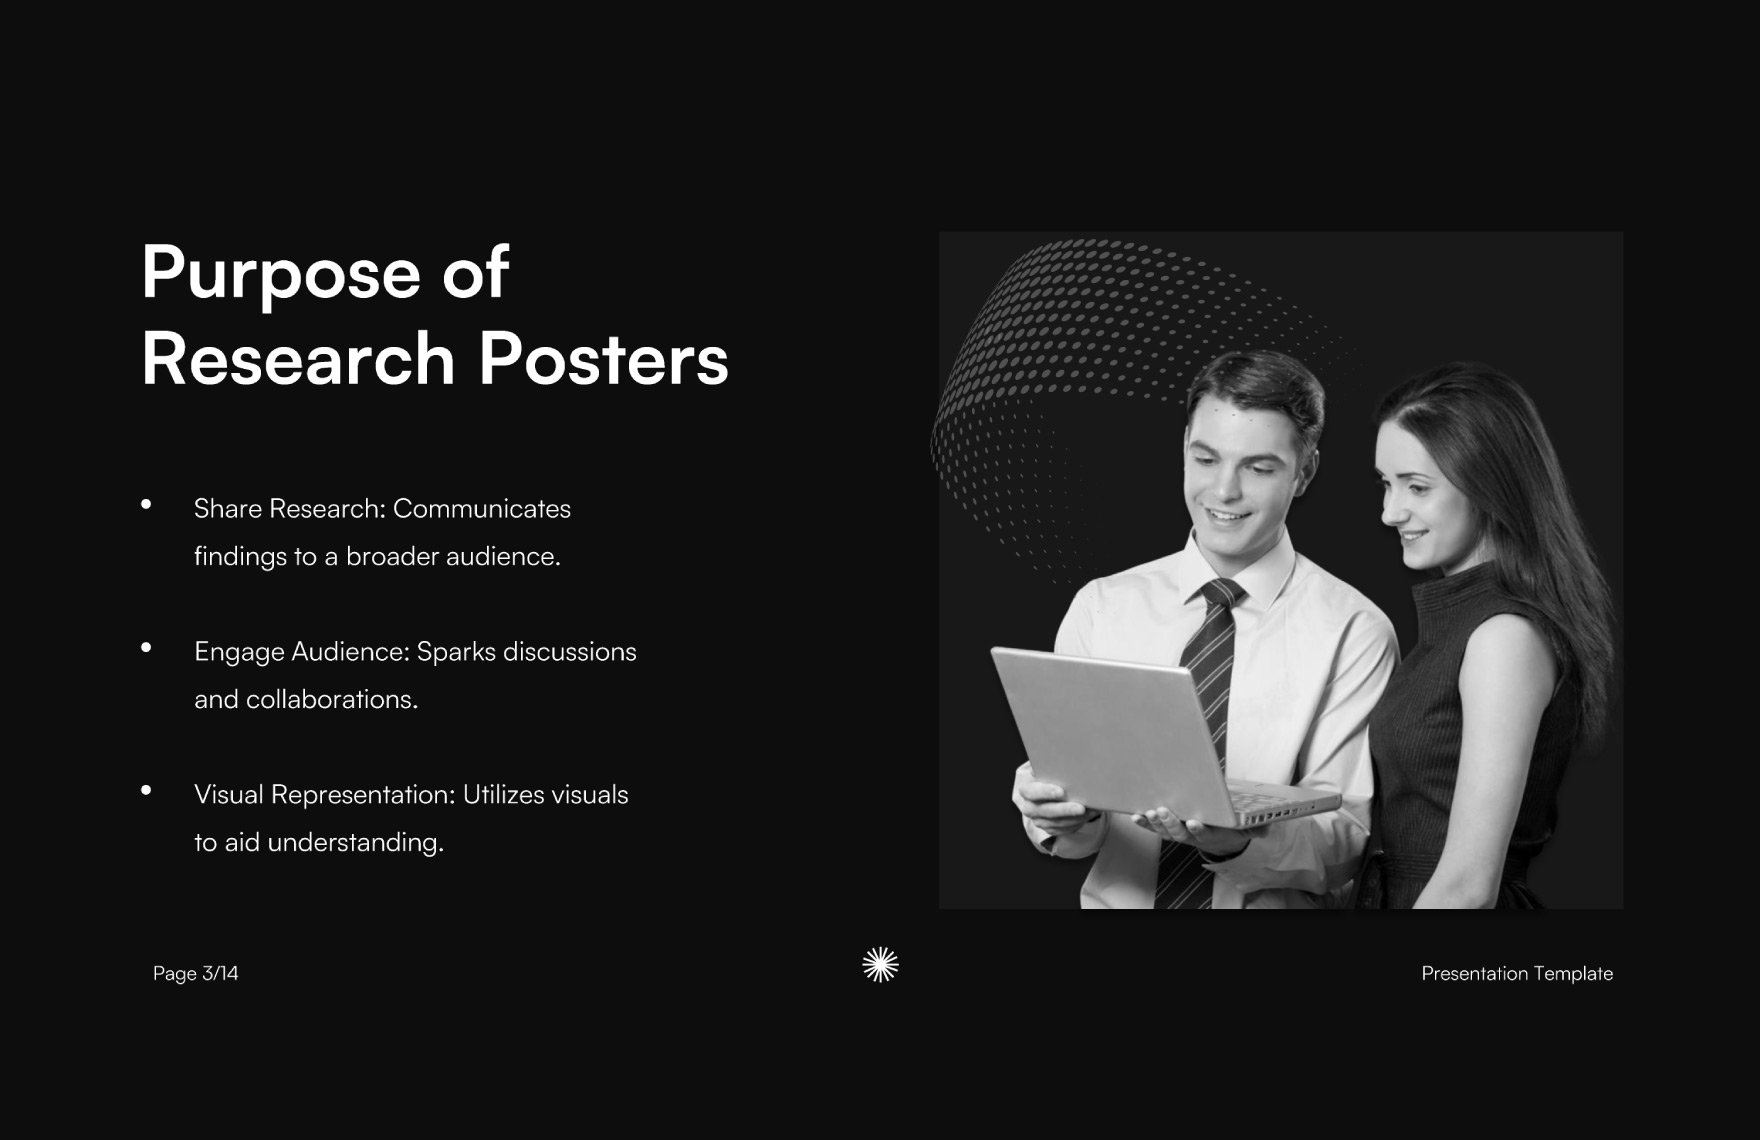 Research Poster Template for Keynote